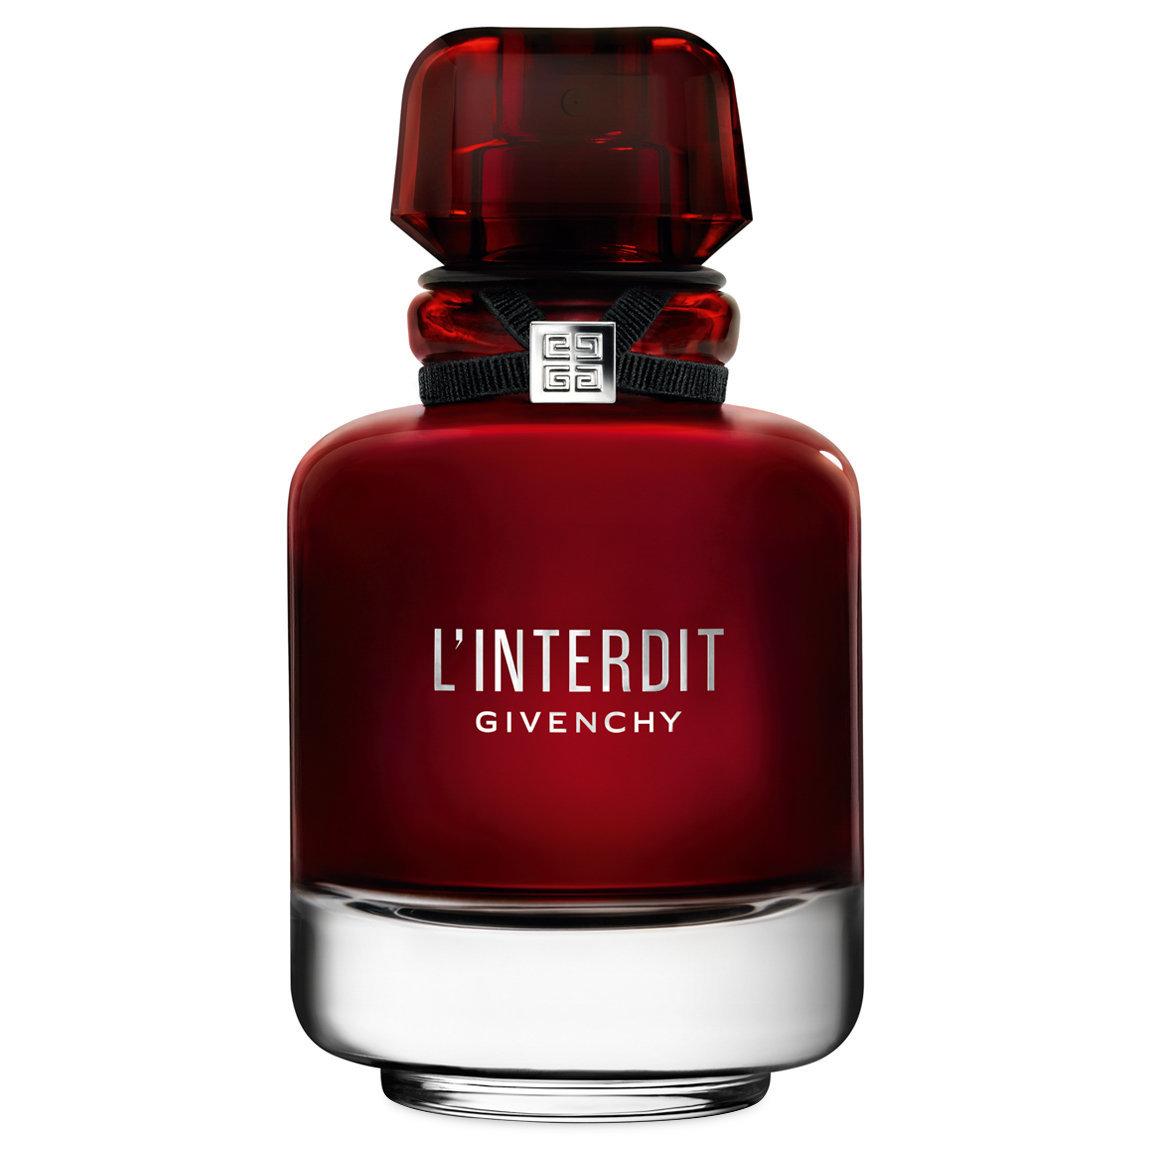 Givenchy L'Interdit Rouge EDP 80 ml alternative view 1 - product swatch.